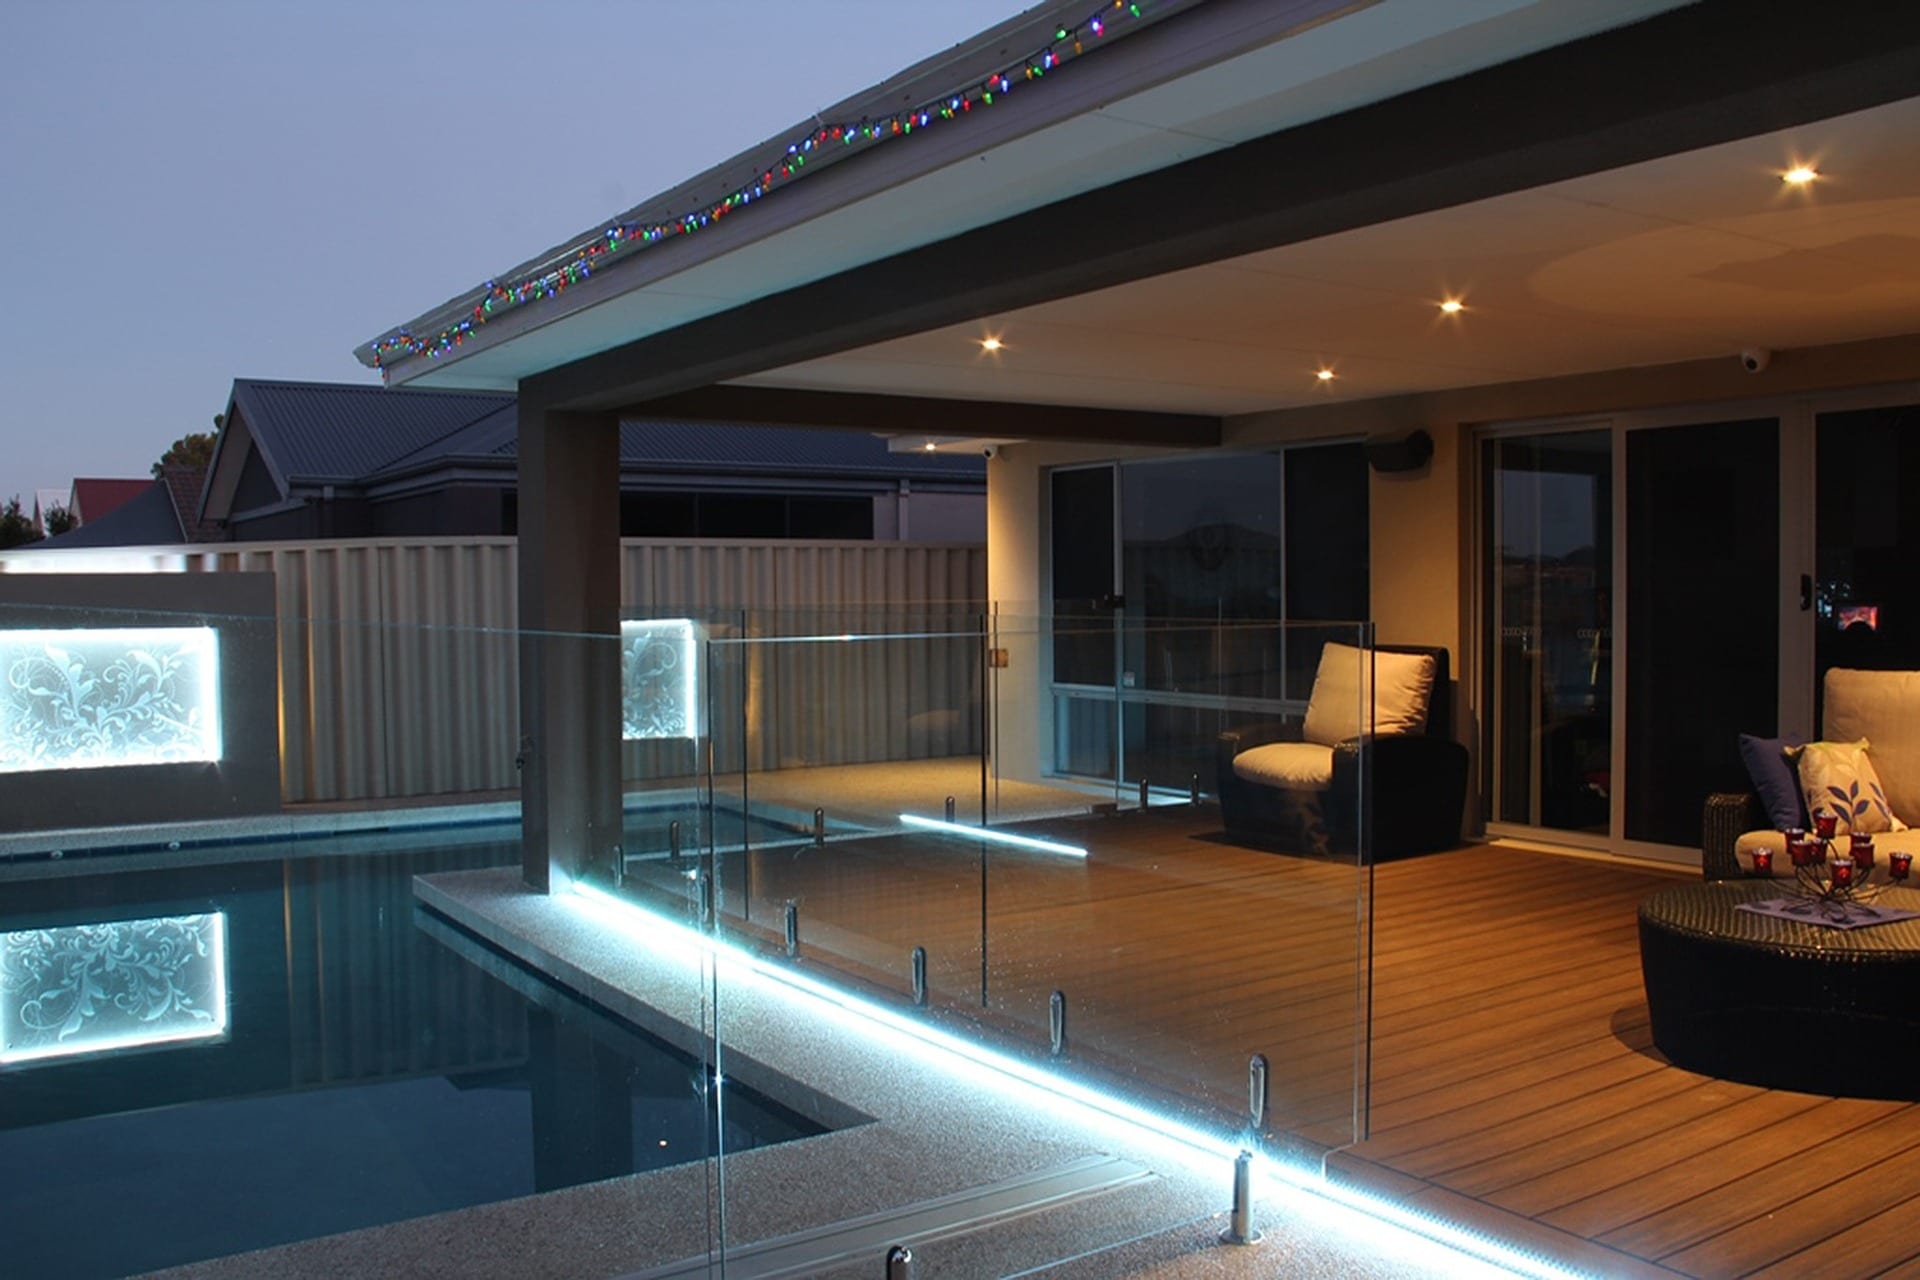 Composite decking may be the perfect option for your outdoor living space.